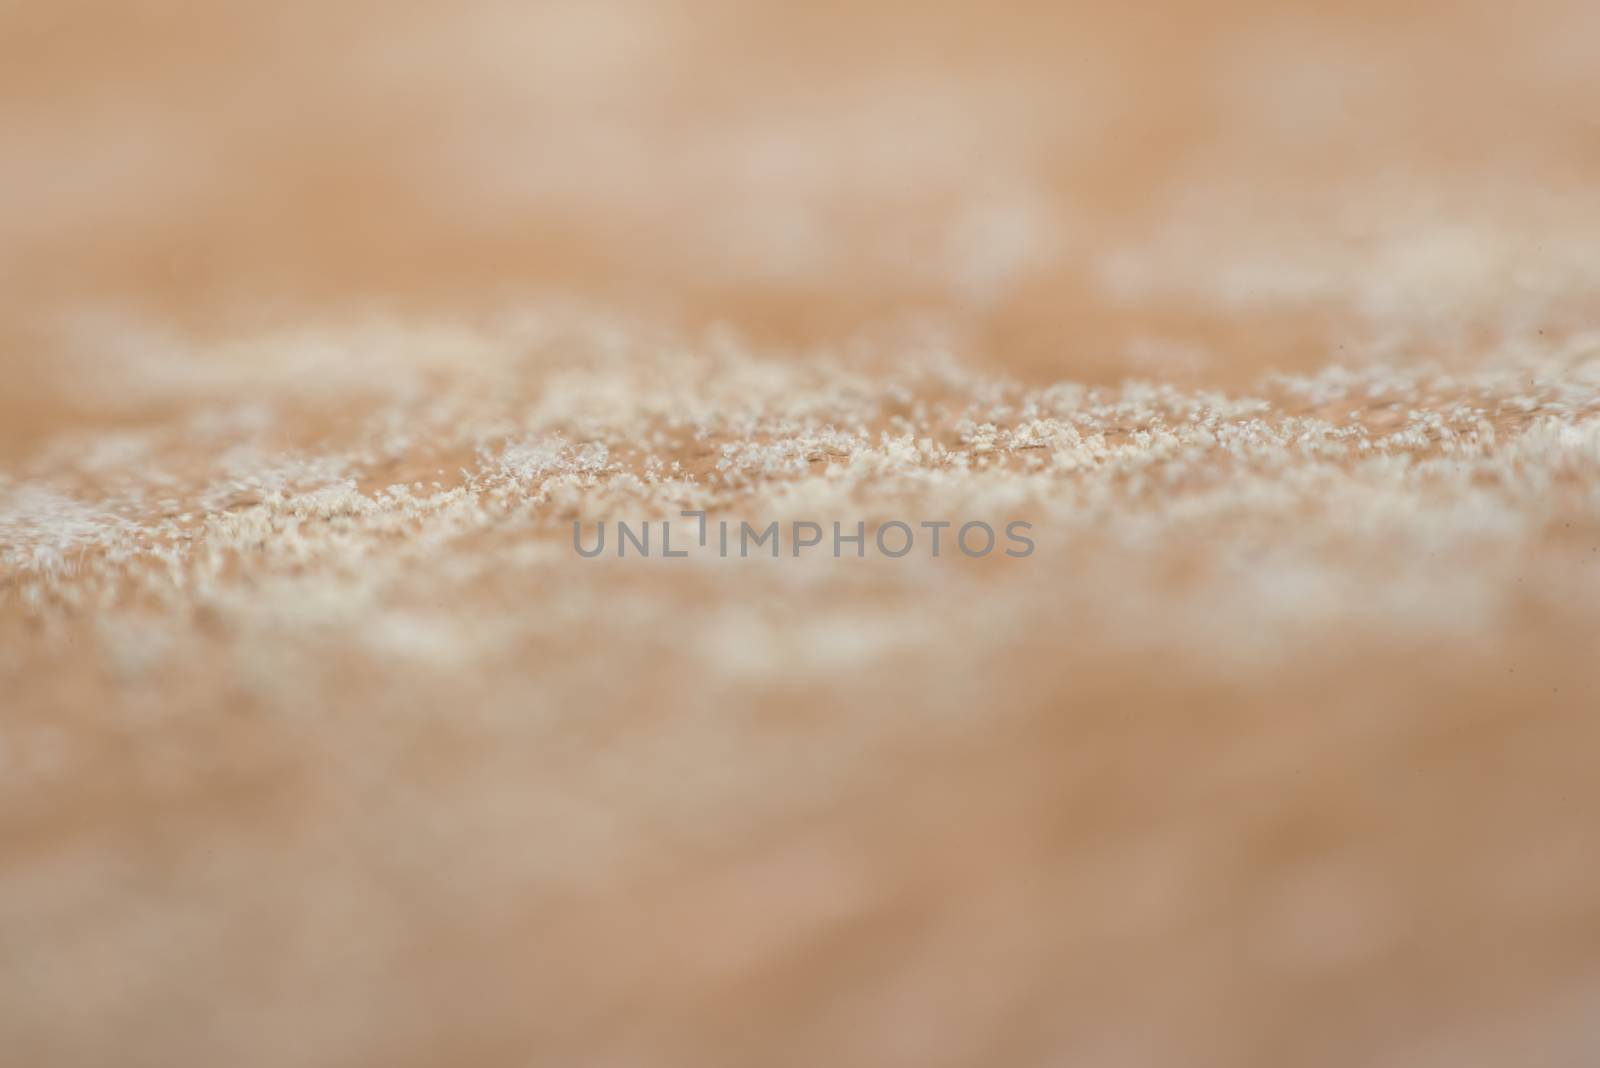 Macro of Mold Spores grown on skin of the leather Molds are a large and taxonomically diverse number of fungal species in which the growth of hyphae results in discoloration and a fuzzy appearance